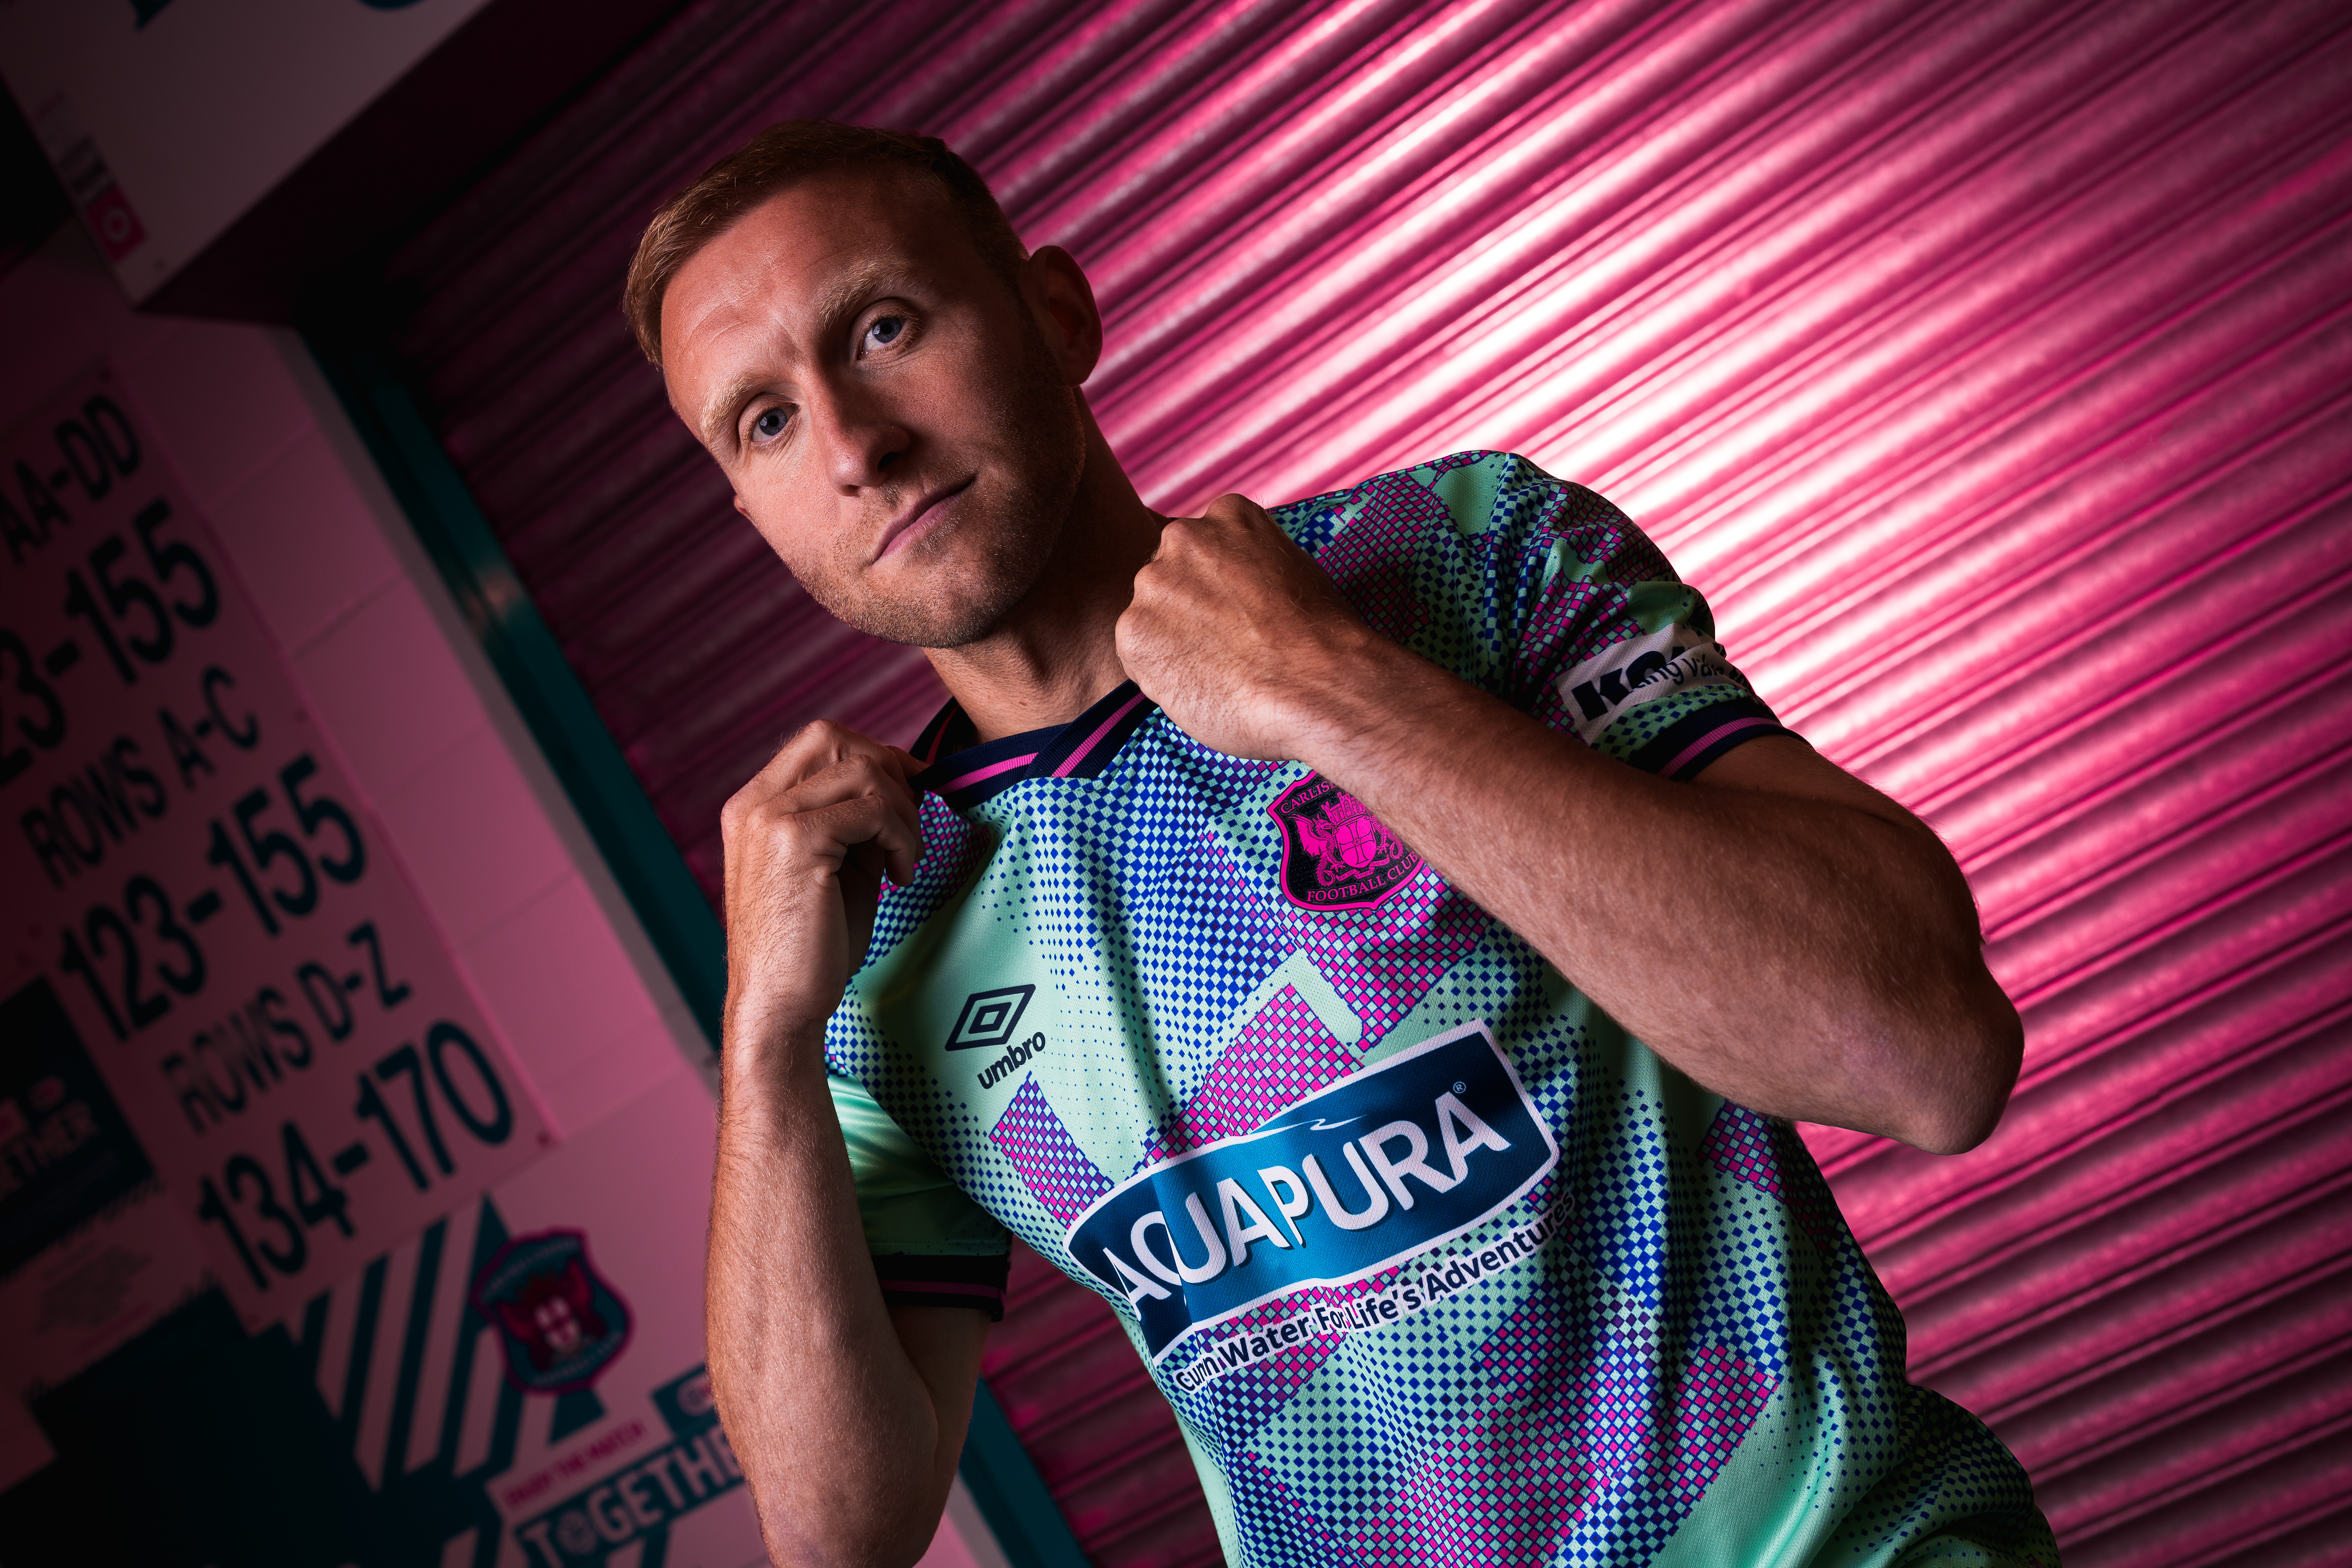 Dylan McGeouch wearing the new away shirt